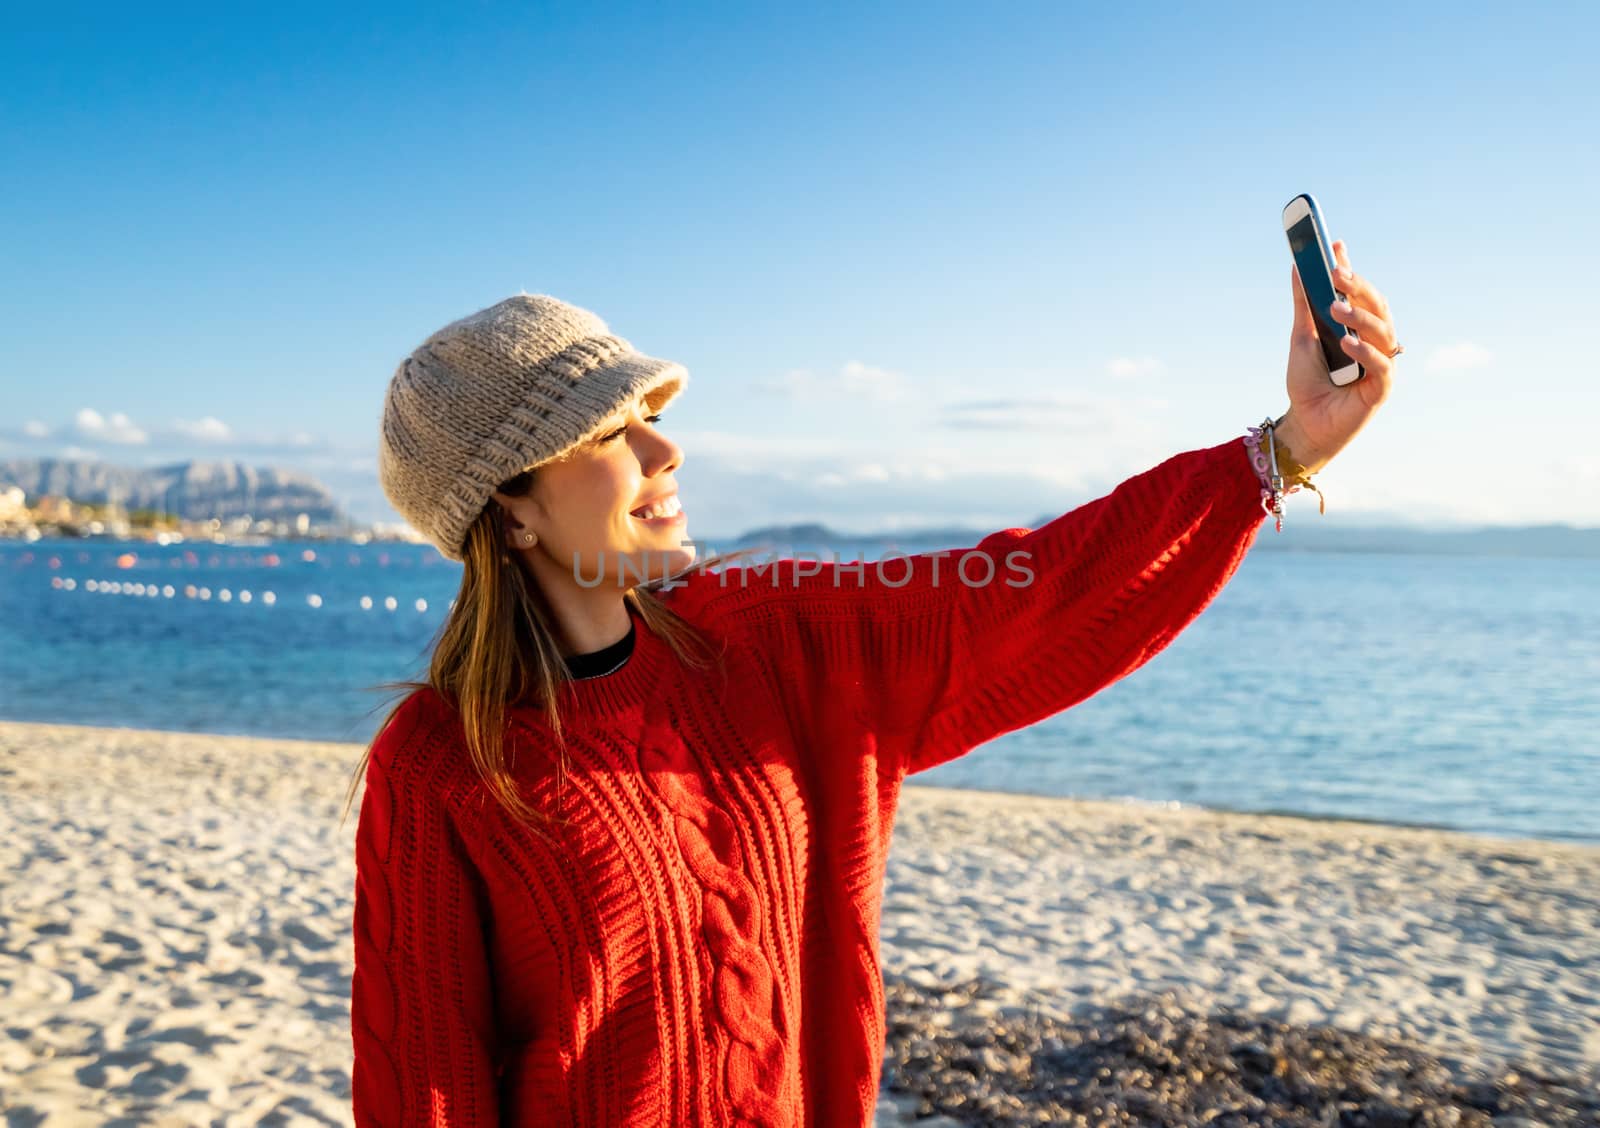 Beautiful young caucasian woman solo traveller make a self portrait herself on the beach at sunset or dawn - Alone female person smiling looking at the phone doing a video call in winter sea vacation by robbyfontanesi